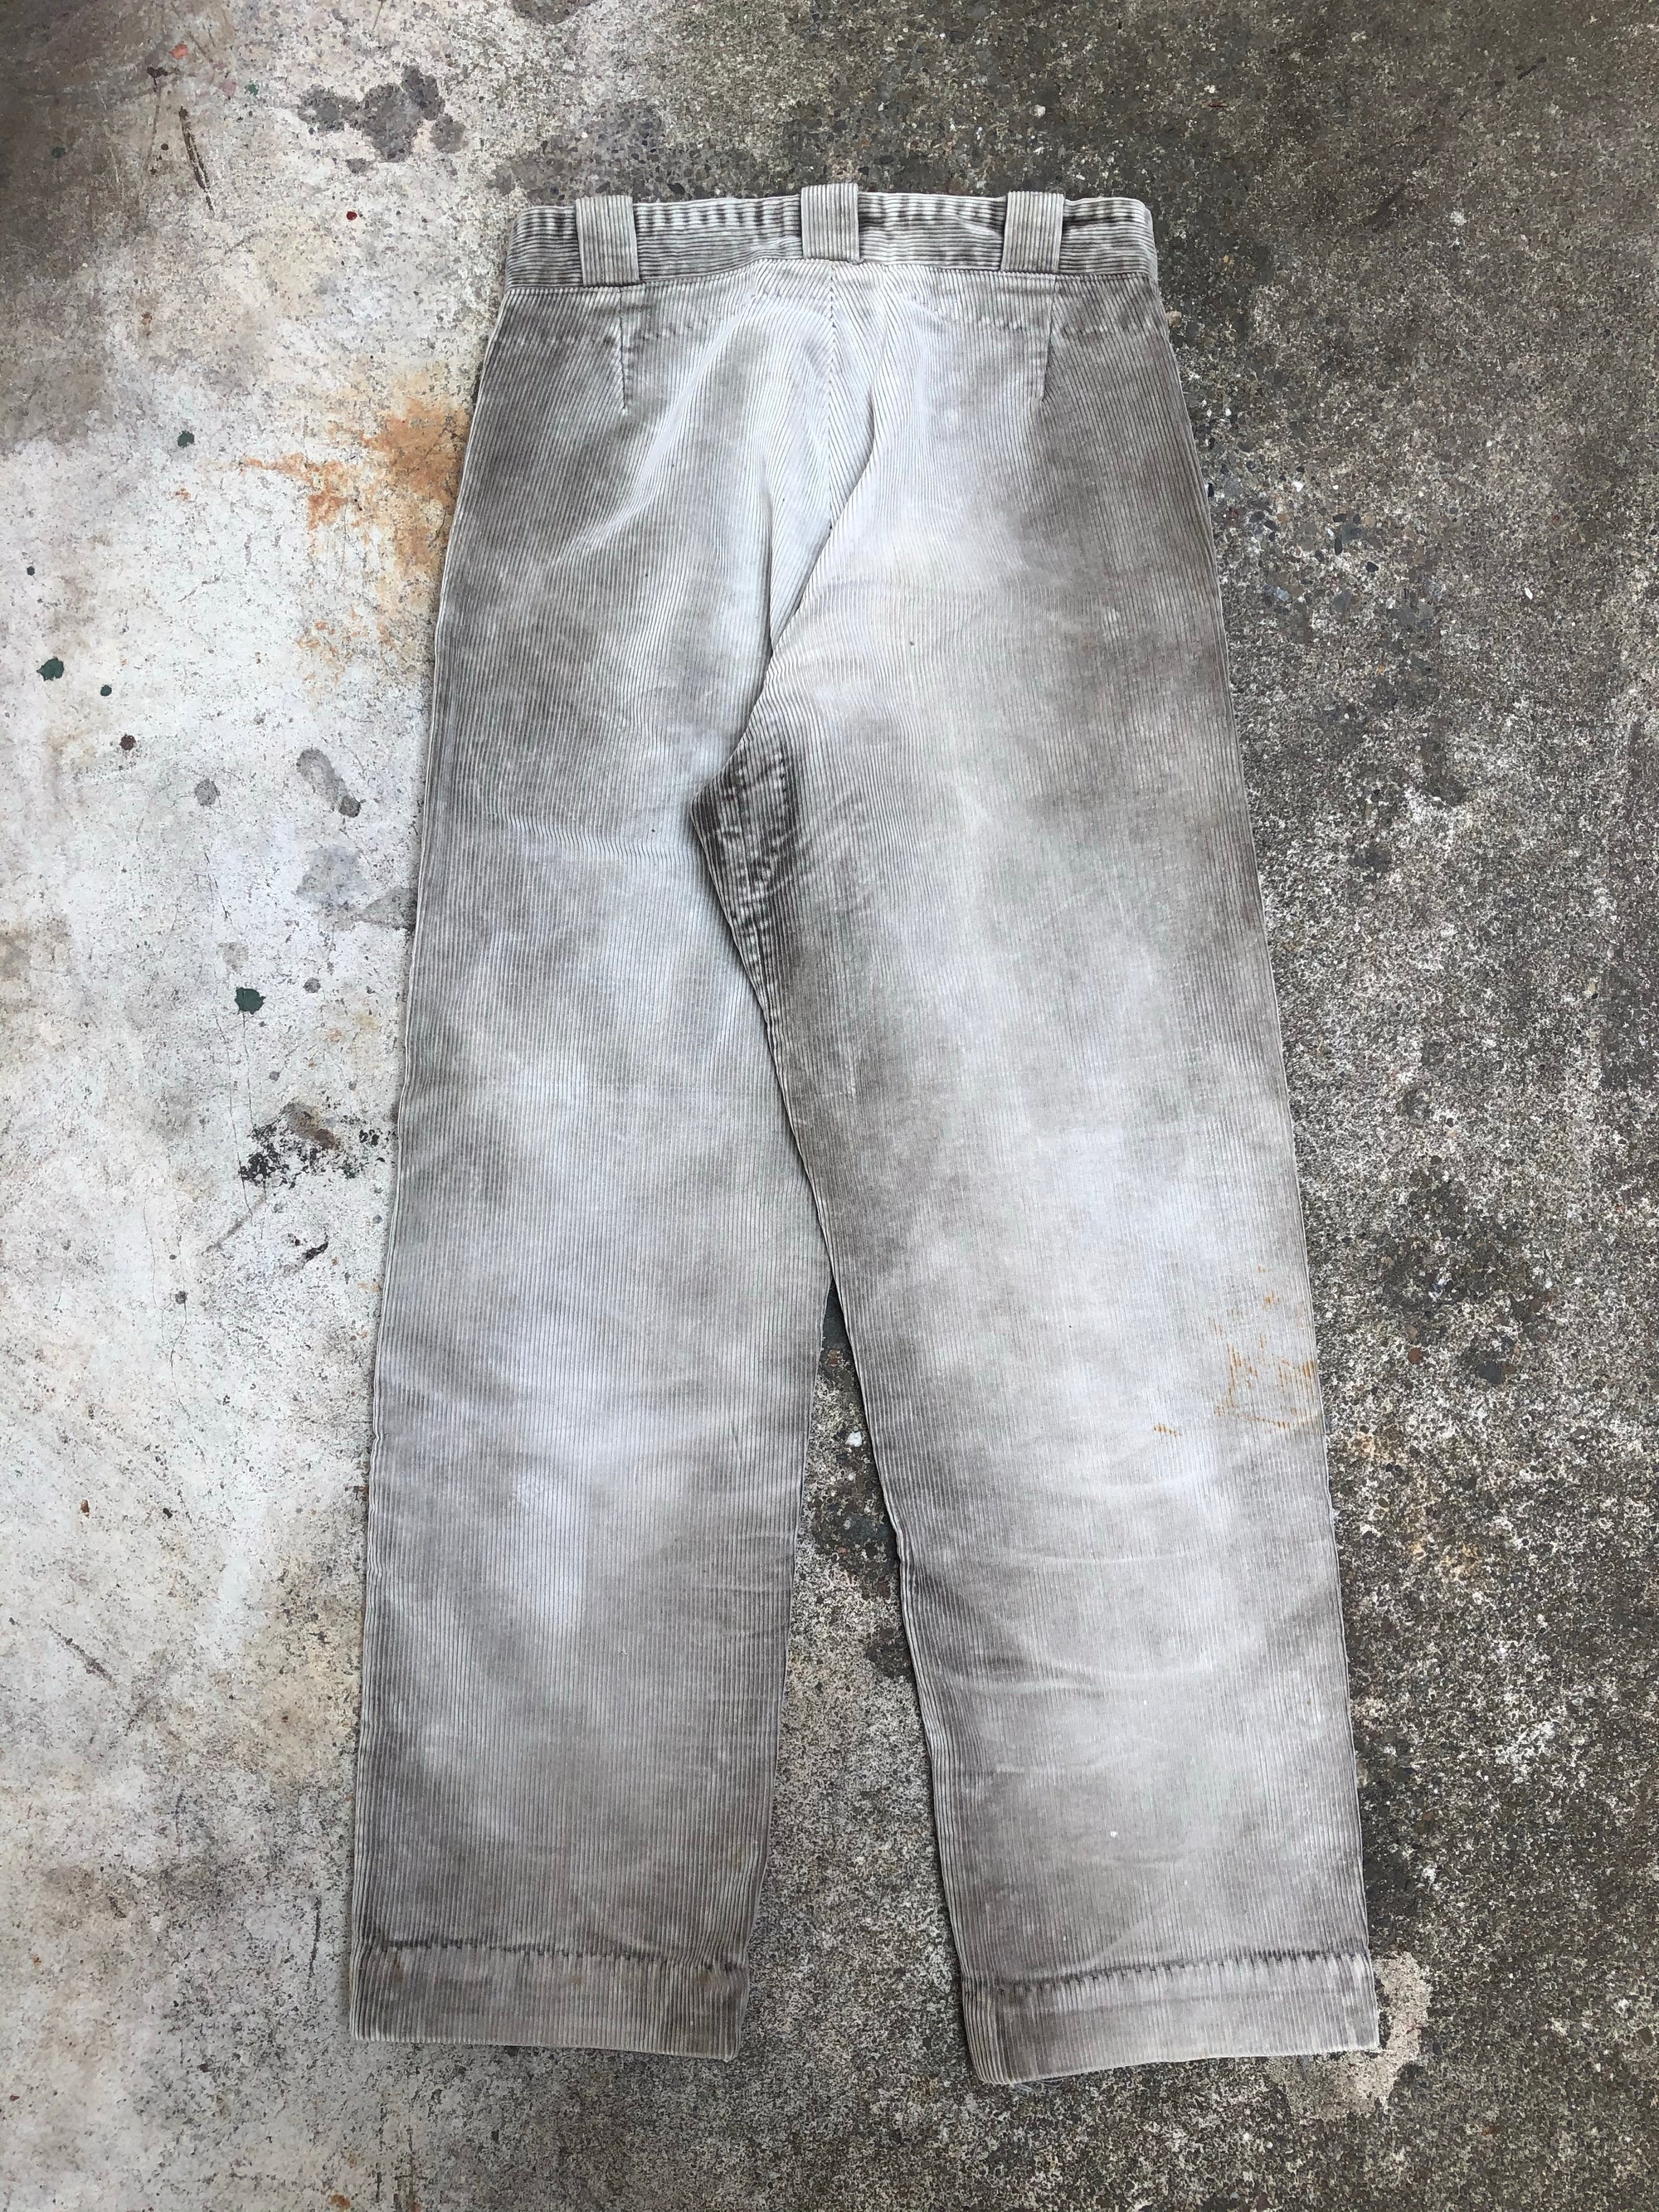 1940s/1950s French Corduroy Patched Work Pants (31X30)